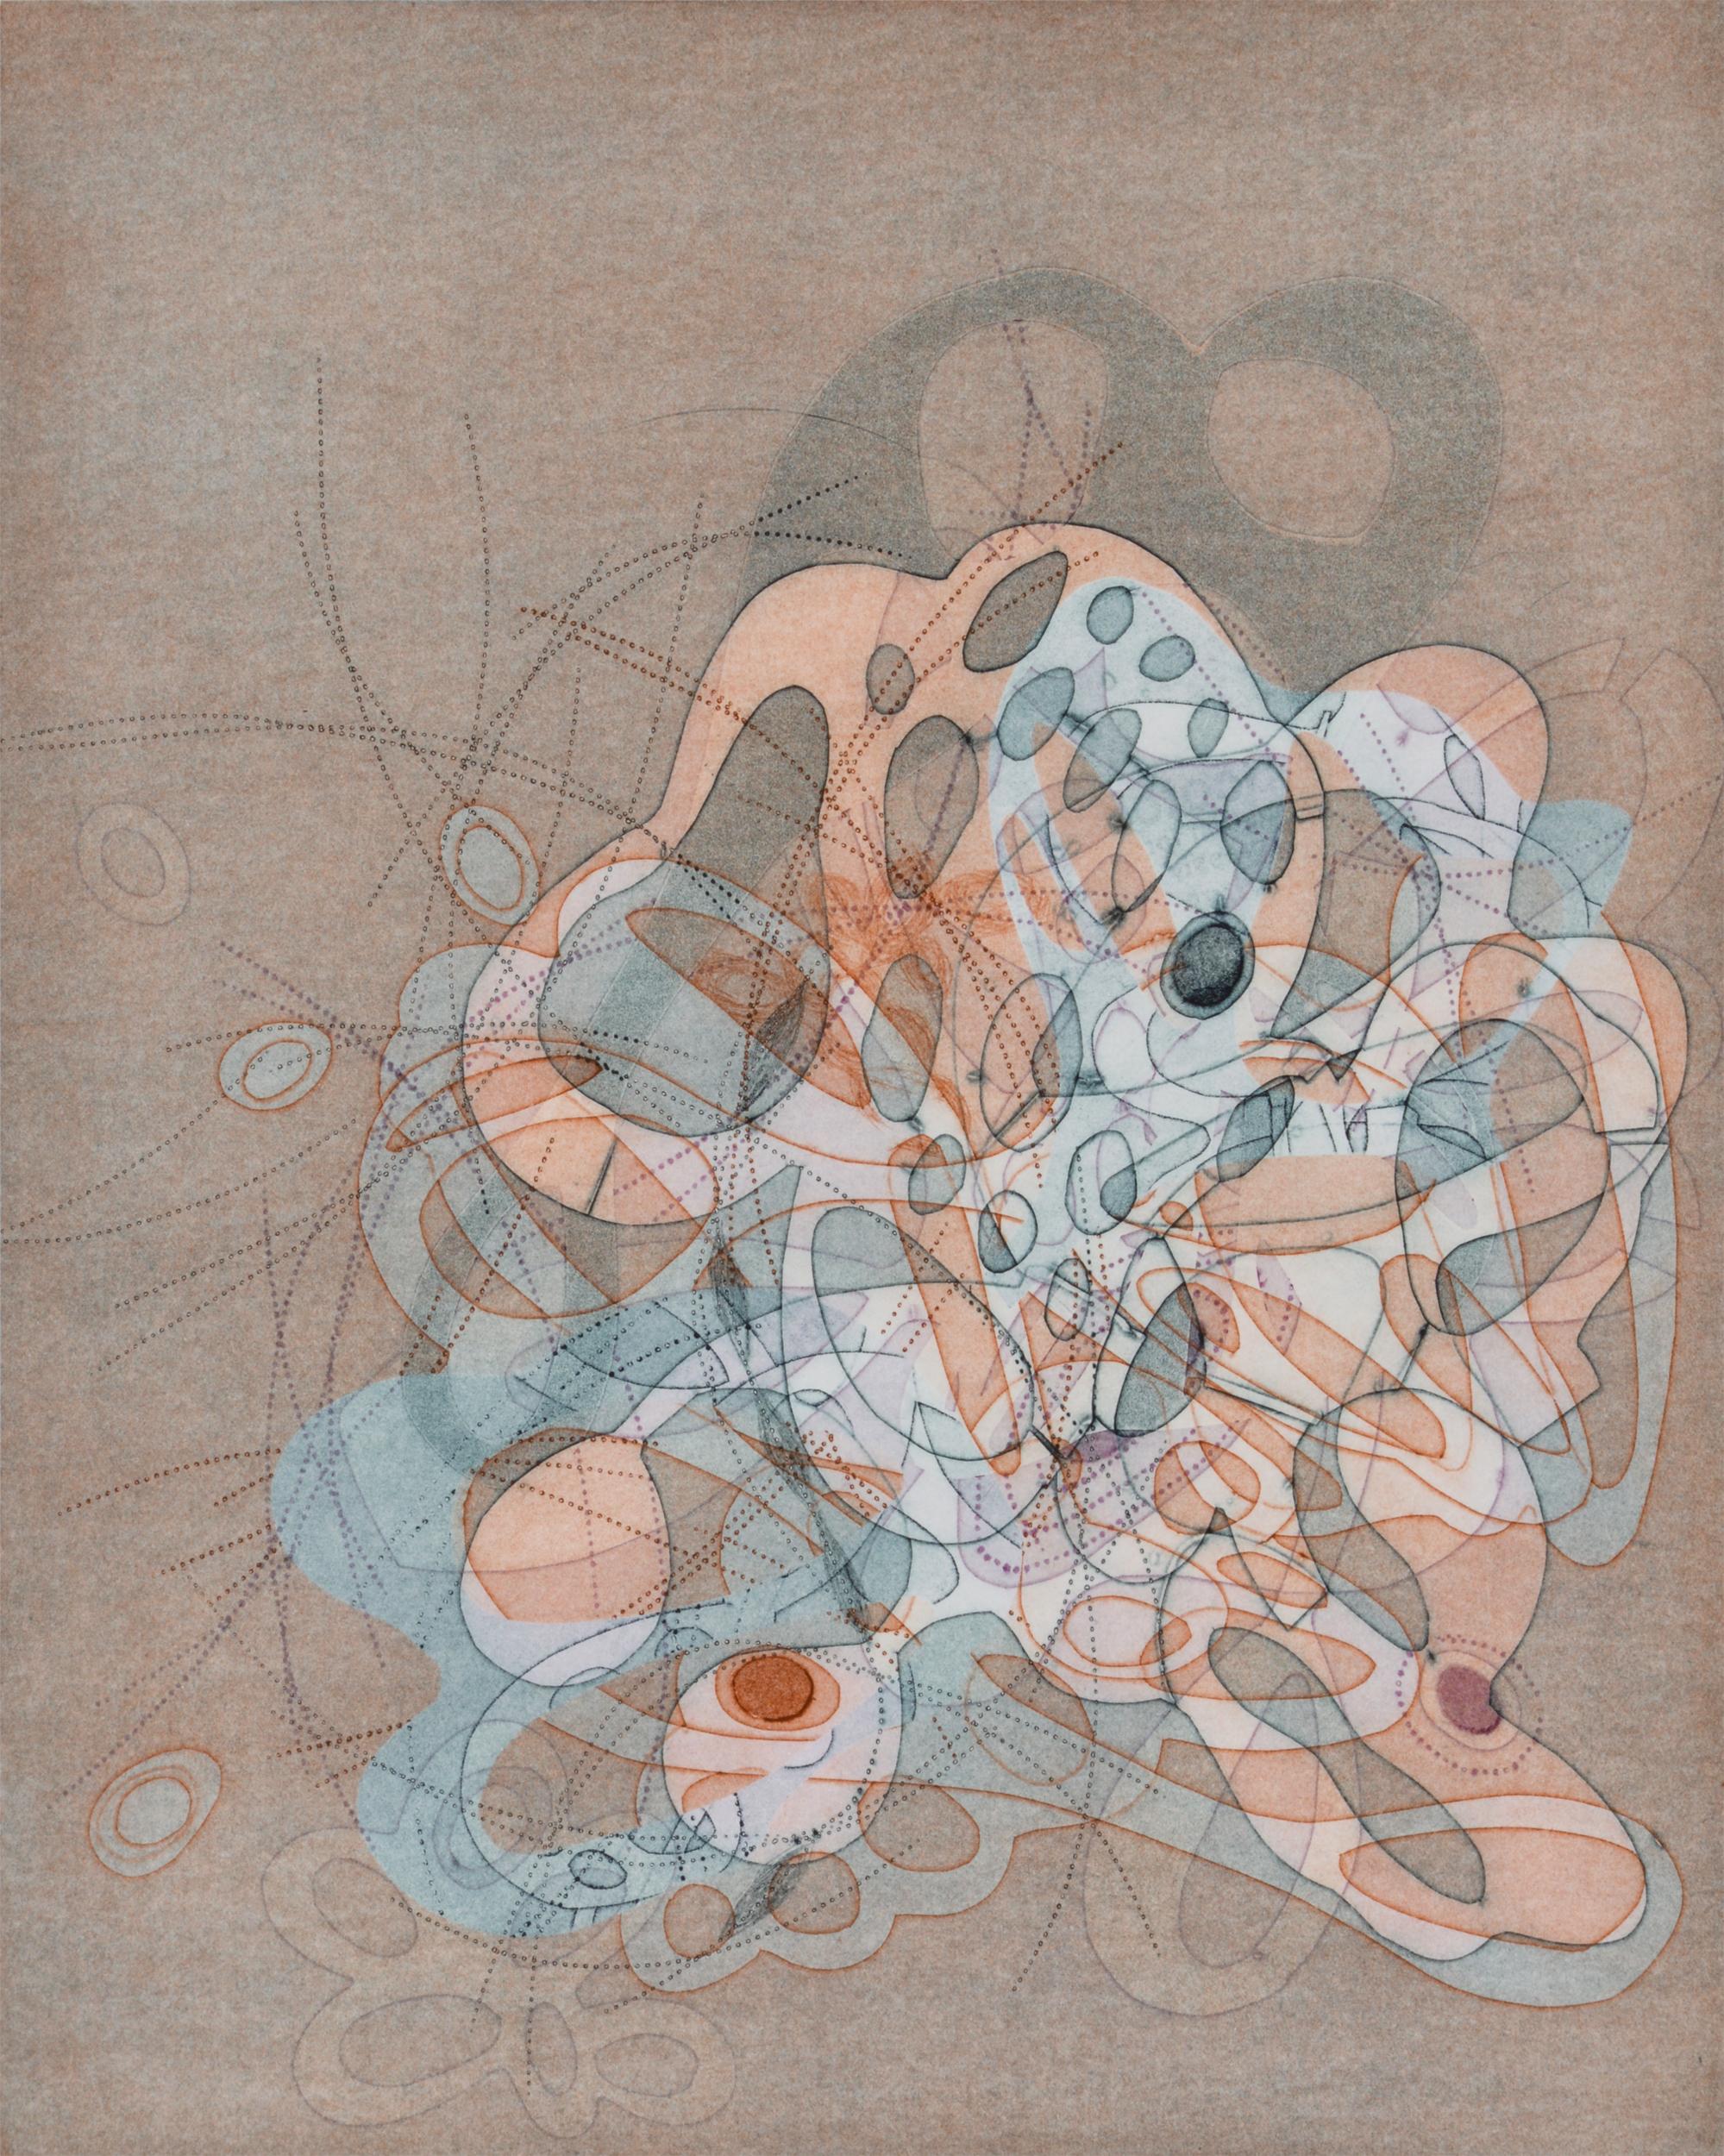 Taiko Chandler Abstract Print - "On and On #20", delicate pastel colored organic, curvy abstract monoprint